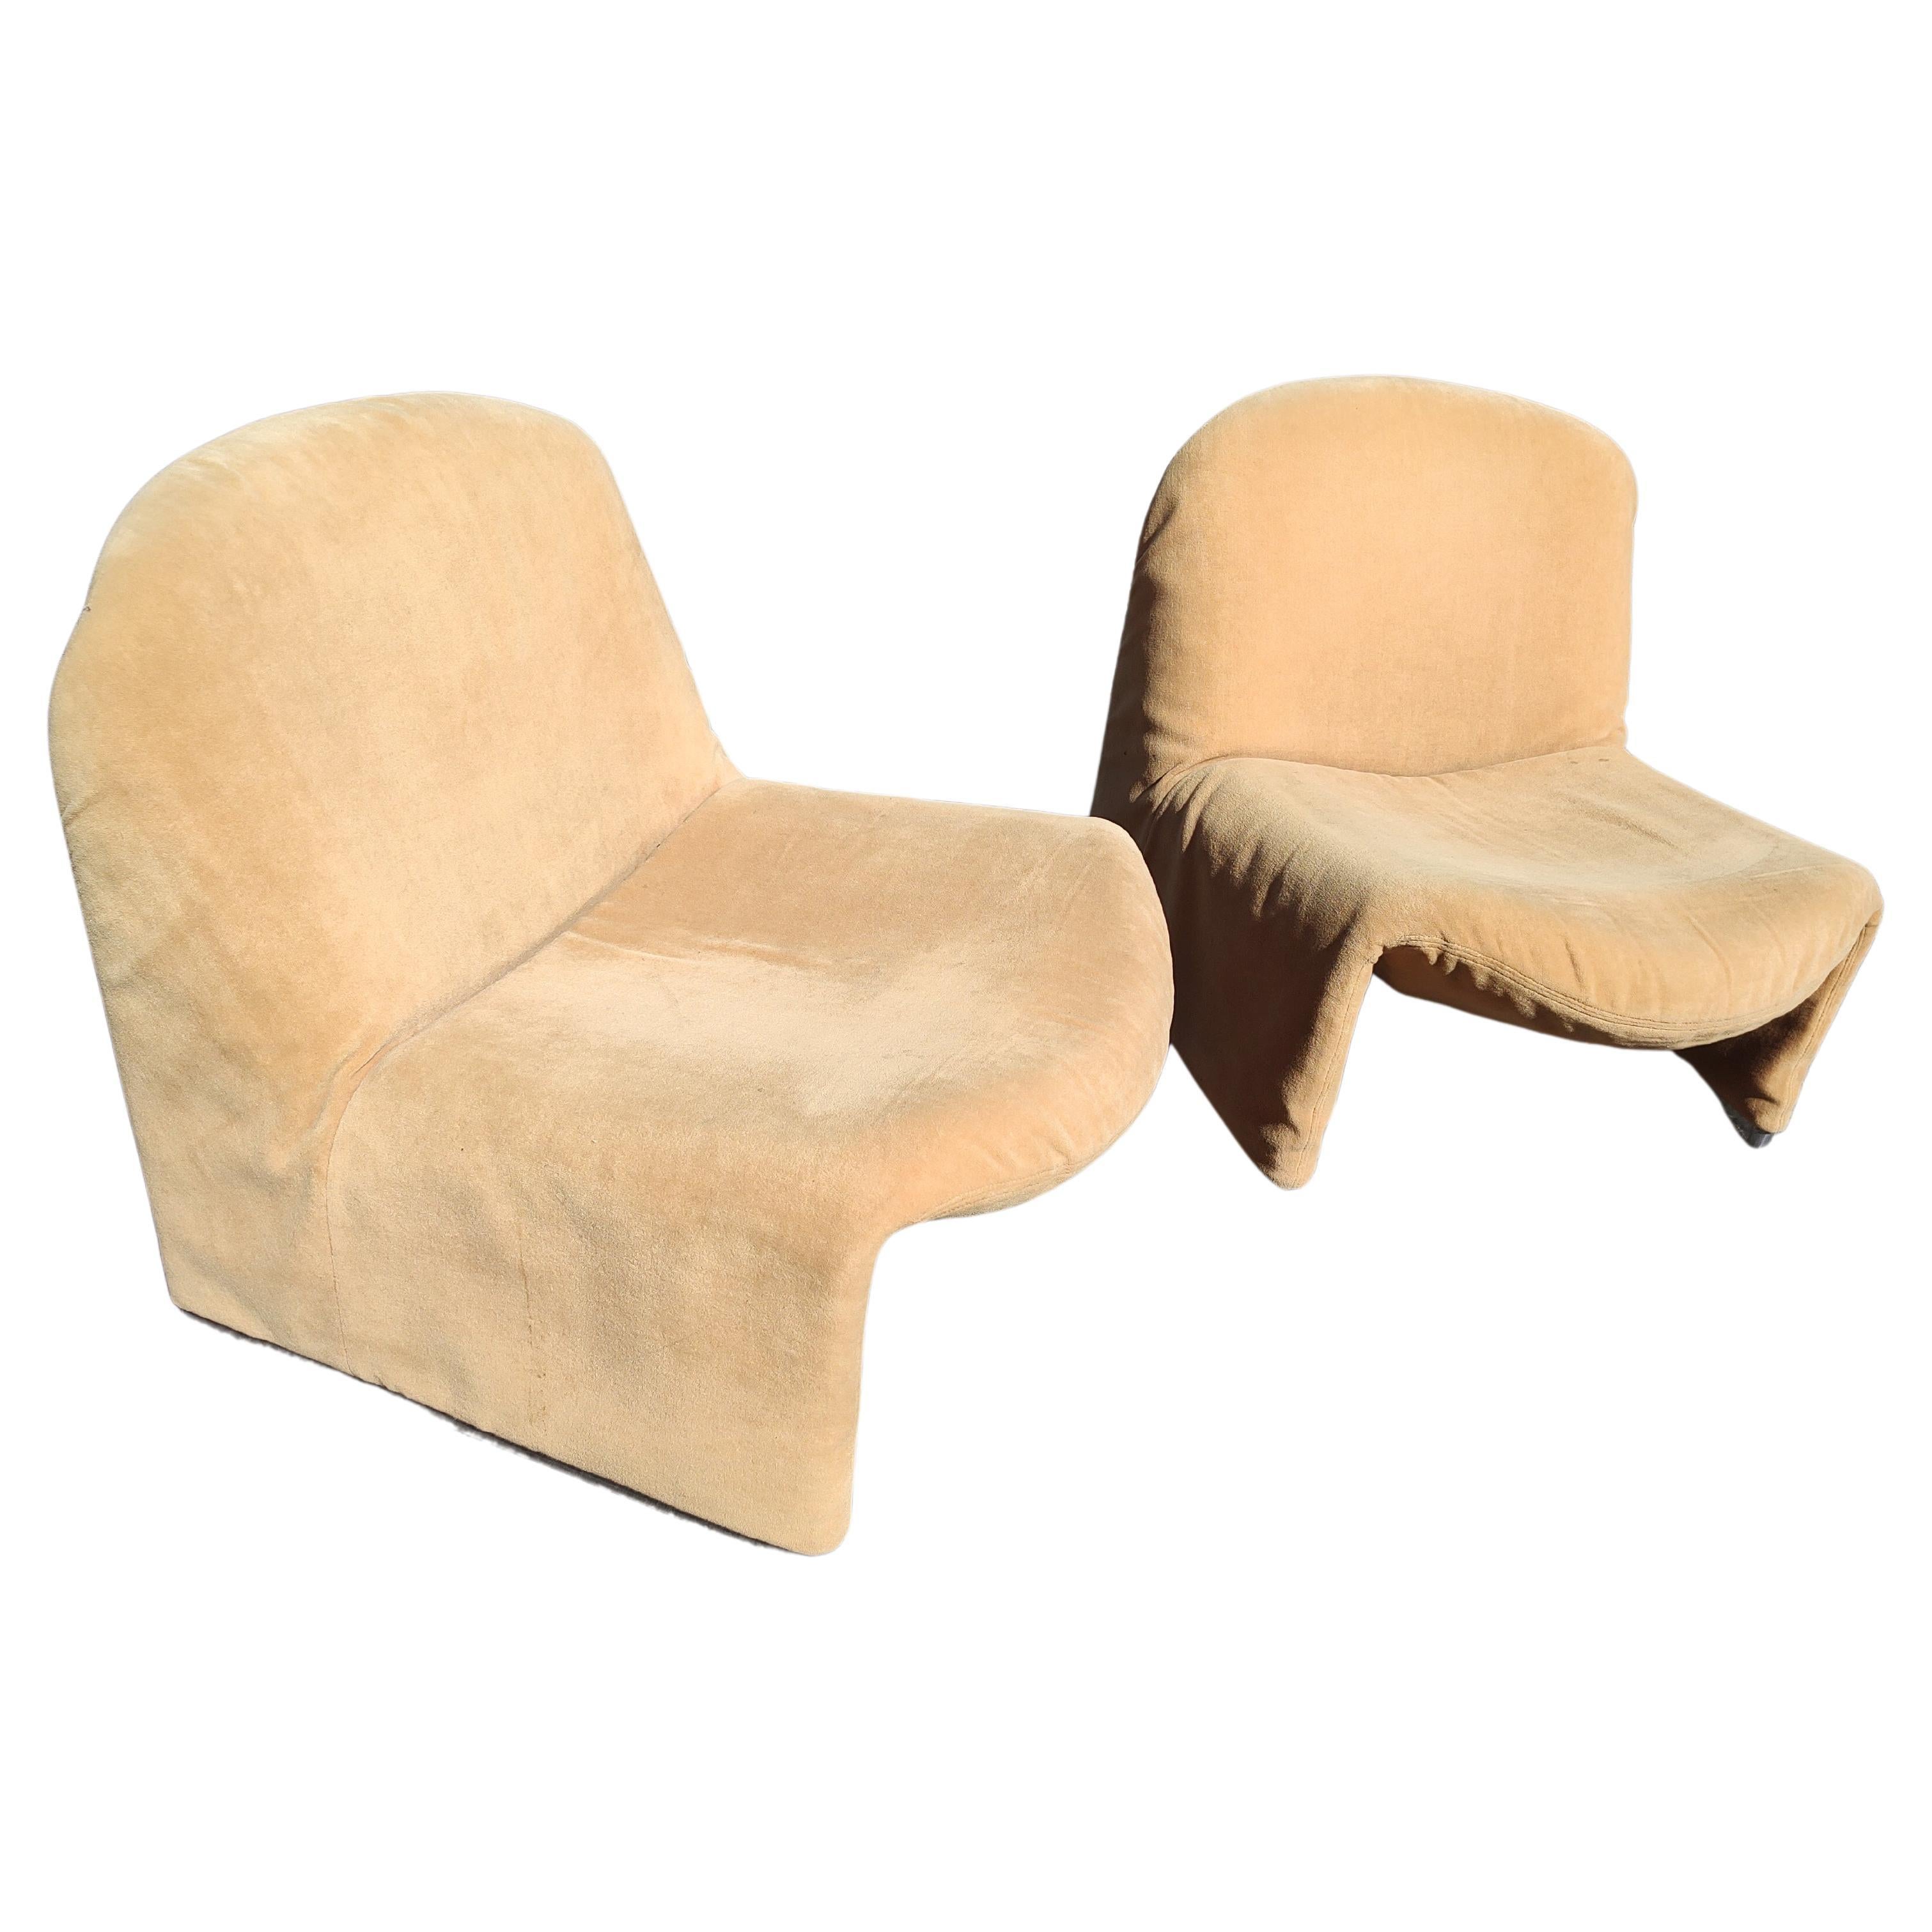 Pair of Mid Century Modern Alky Lounge Chairs Giancarlo Piretti for Artifort 